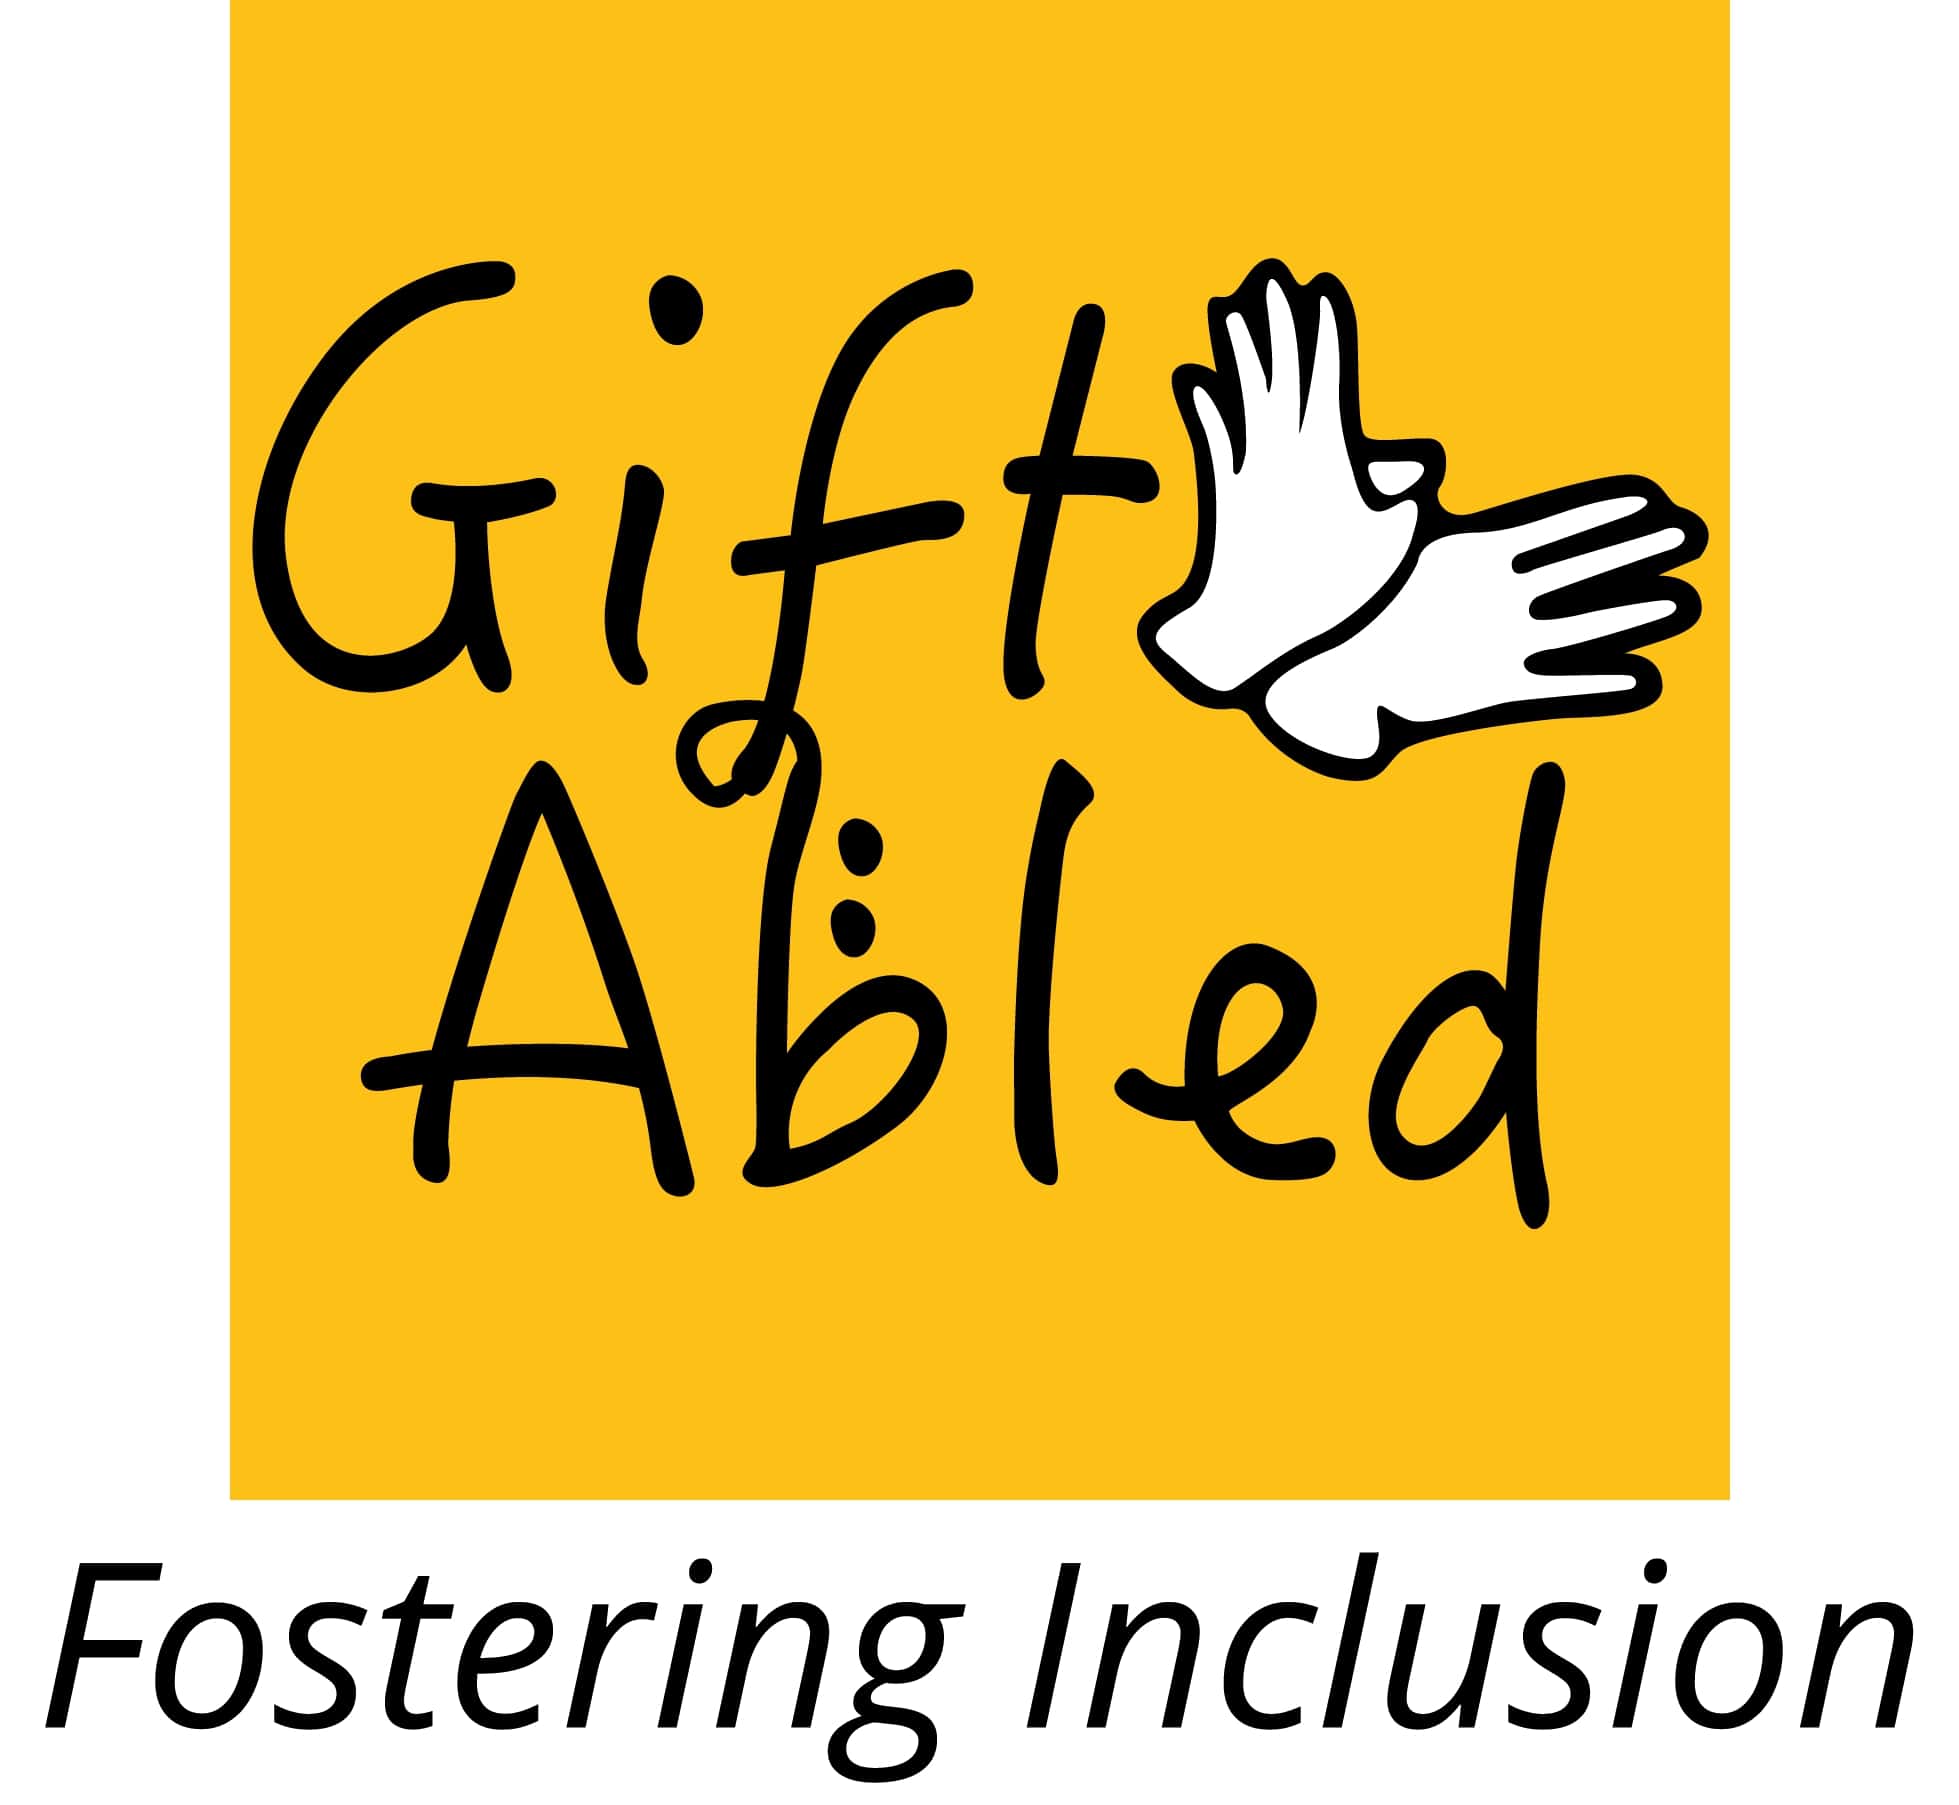 GiftAbled - Fostering Inclusion